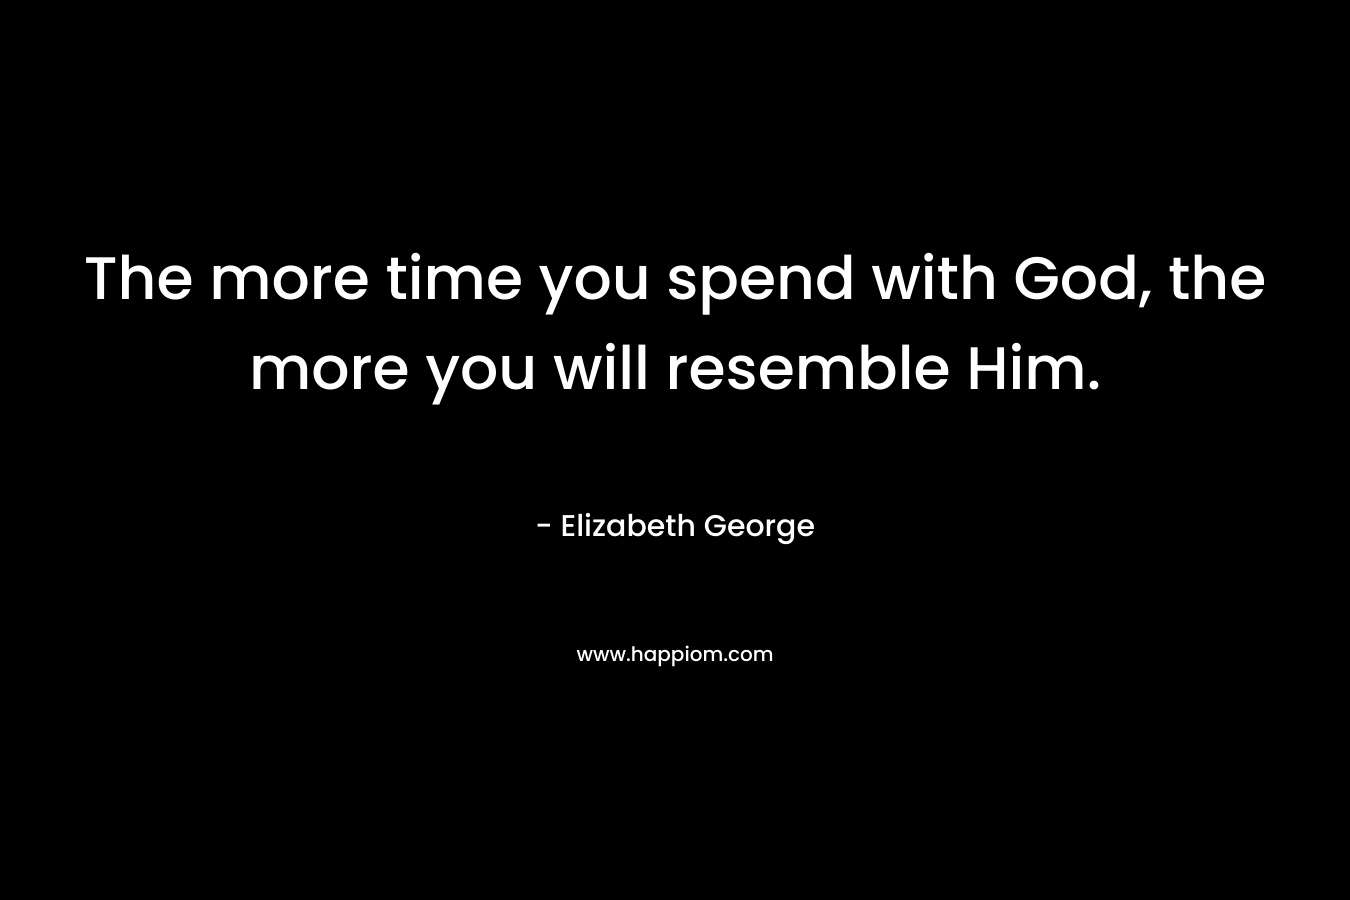 The more time you spend with God, the more you will resemble Him. – Elizabeth George